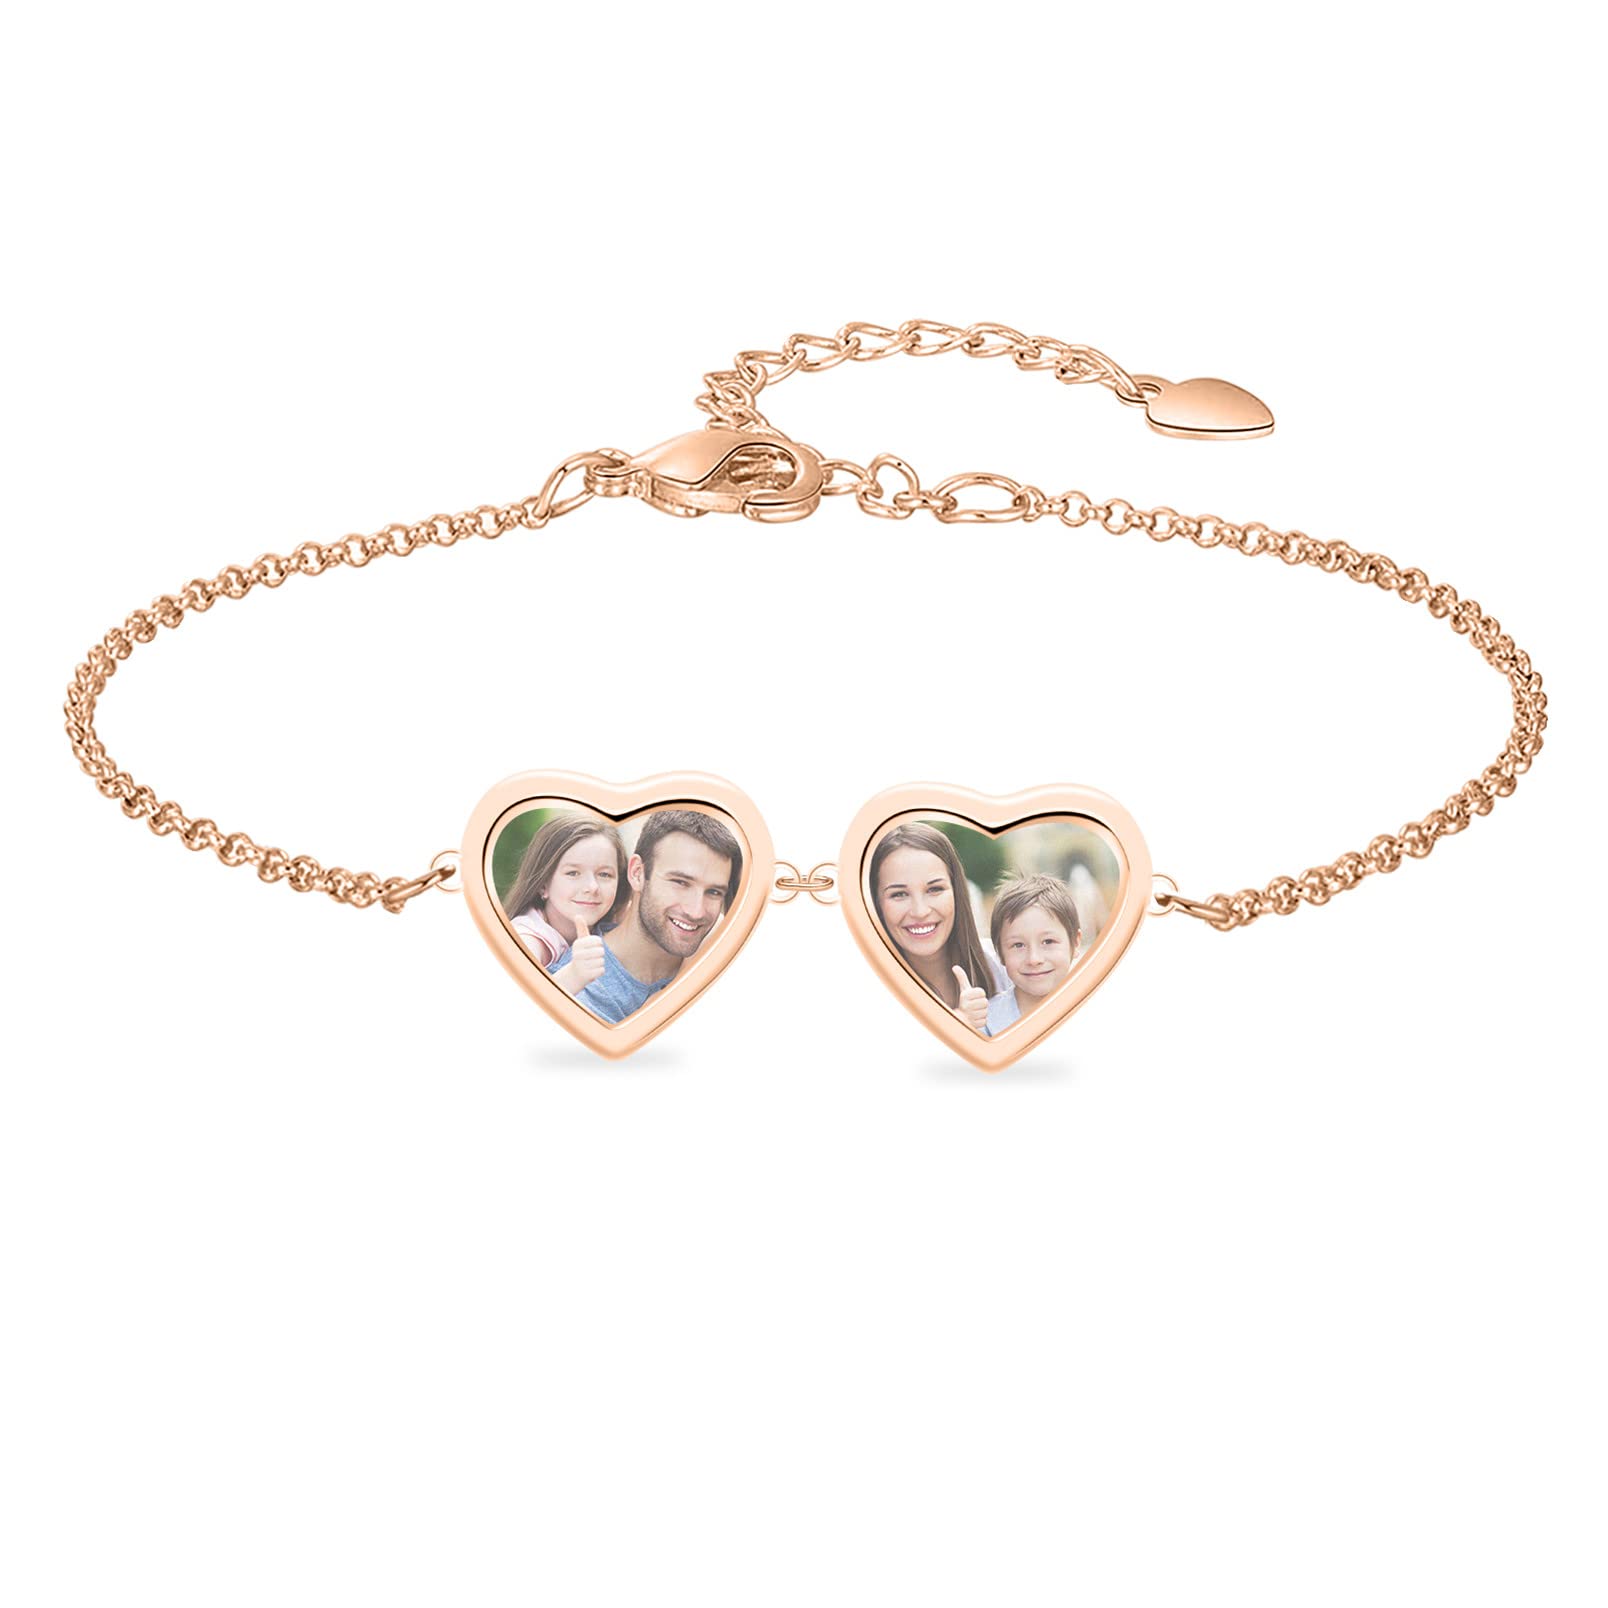 Personalized Bracelet for Women with 2 Photos-YITUB